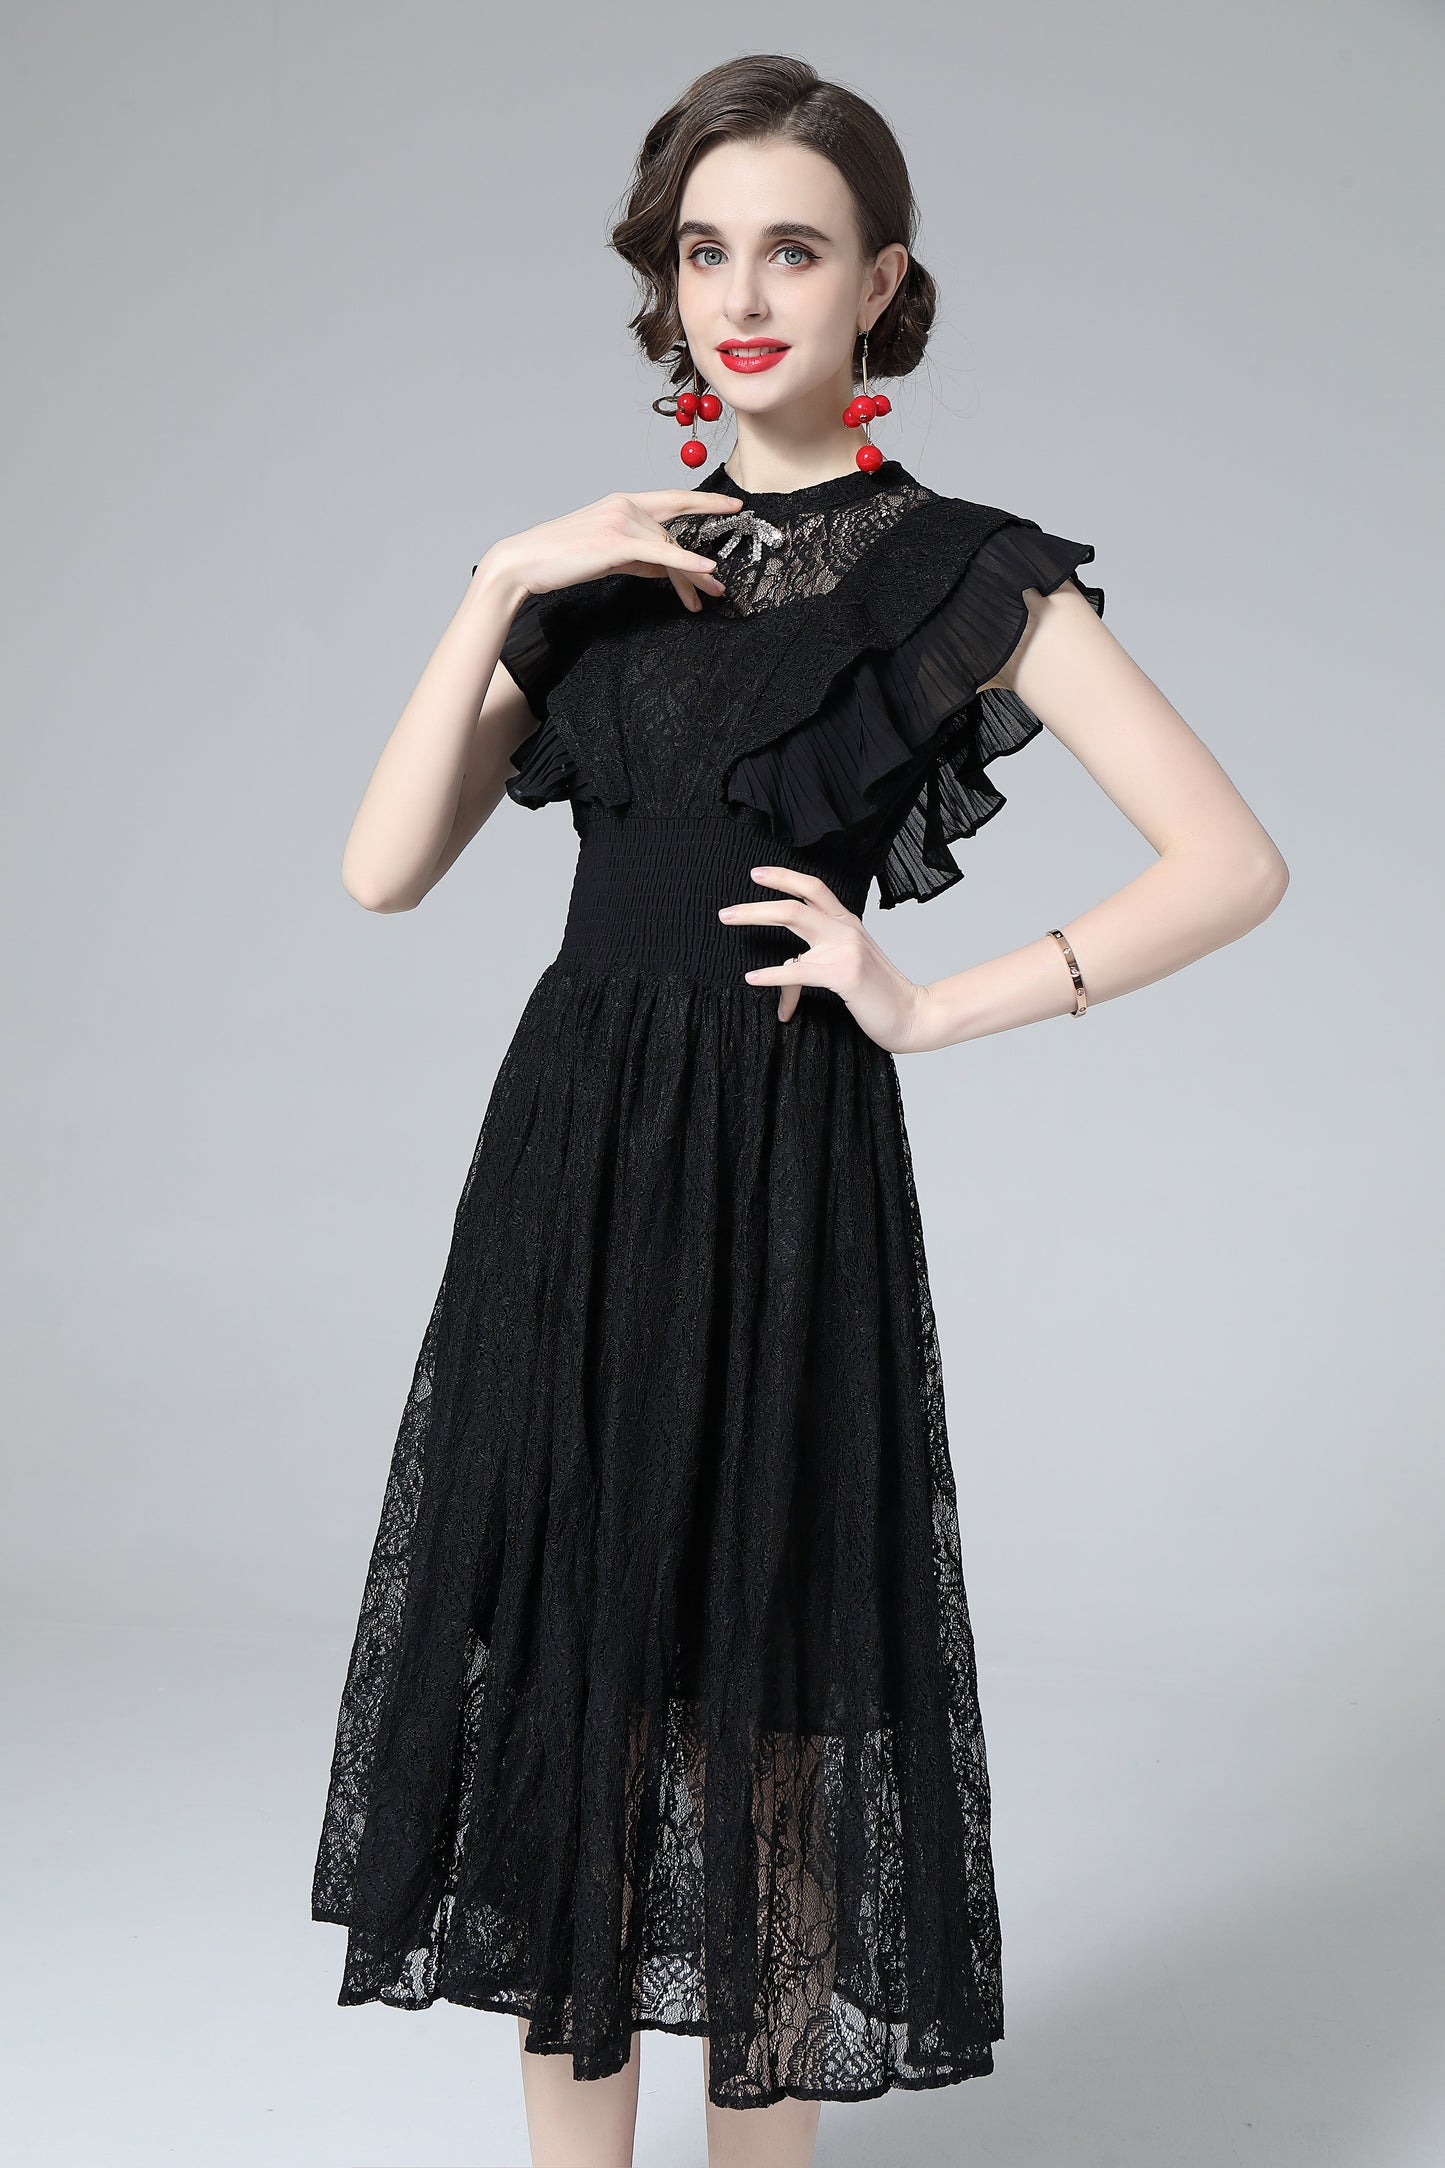 Hollow lace Ruffled sleeves with Bow Decoration Retro Midi Cocktail Dress